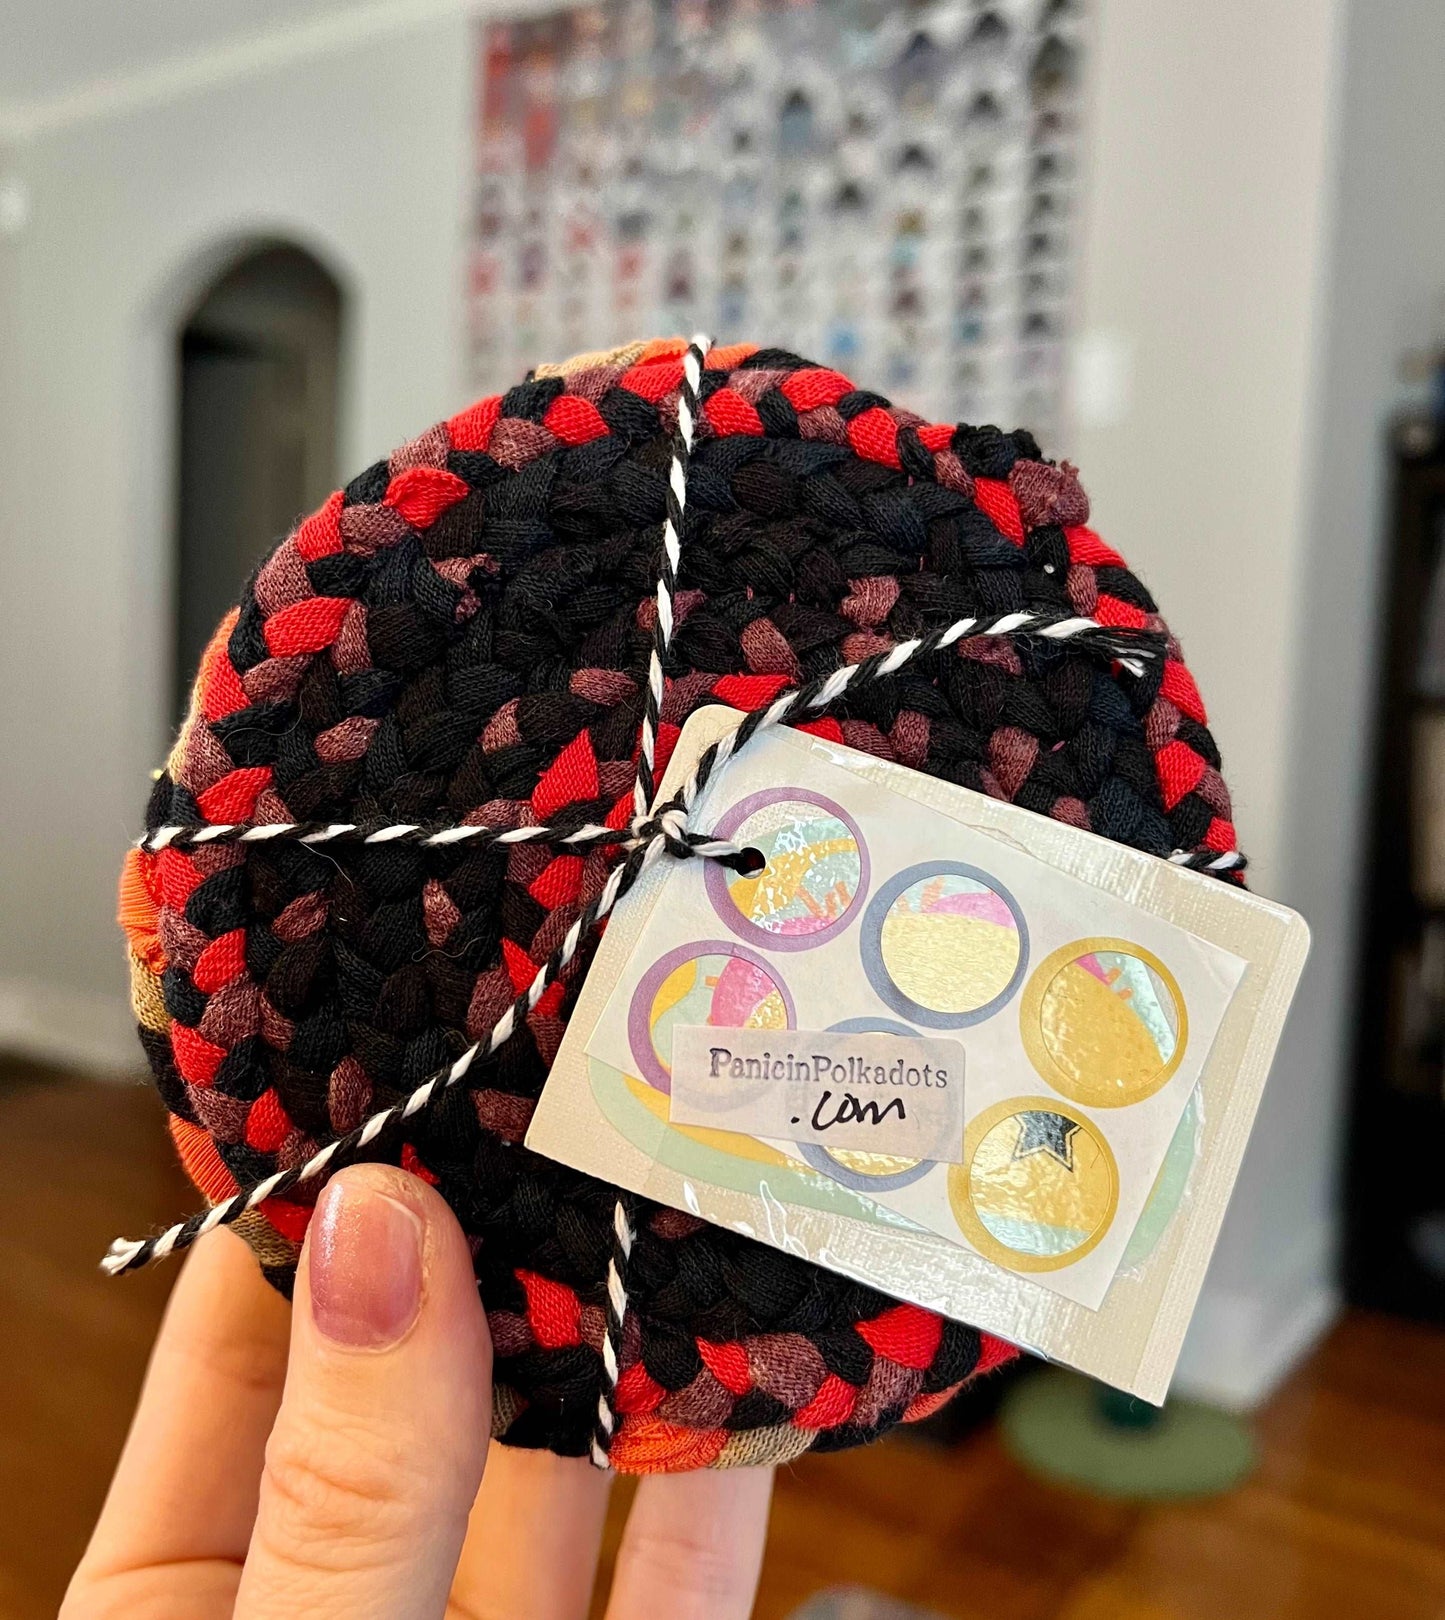 Mini rug coaster set, bound by string and a tag, held up by a hand, with a quilt in the background